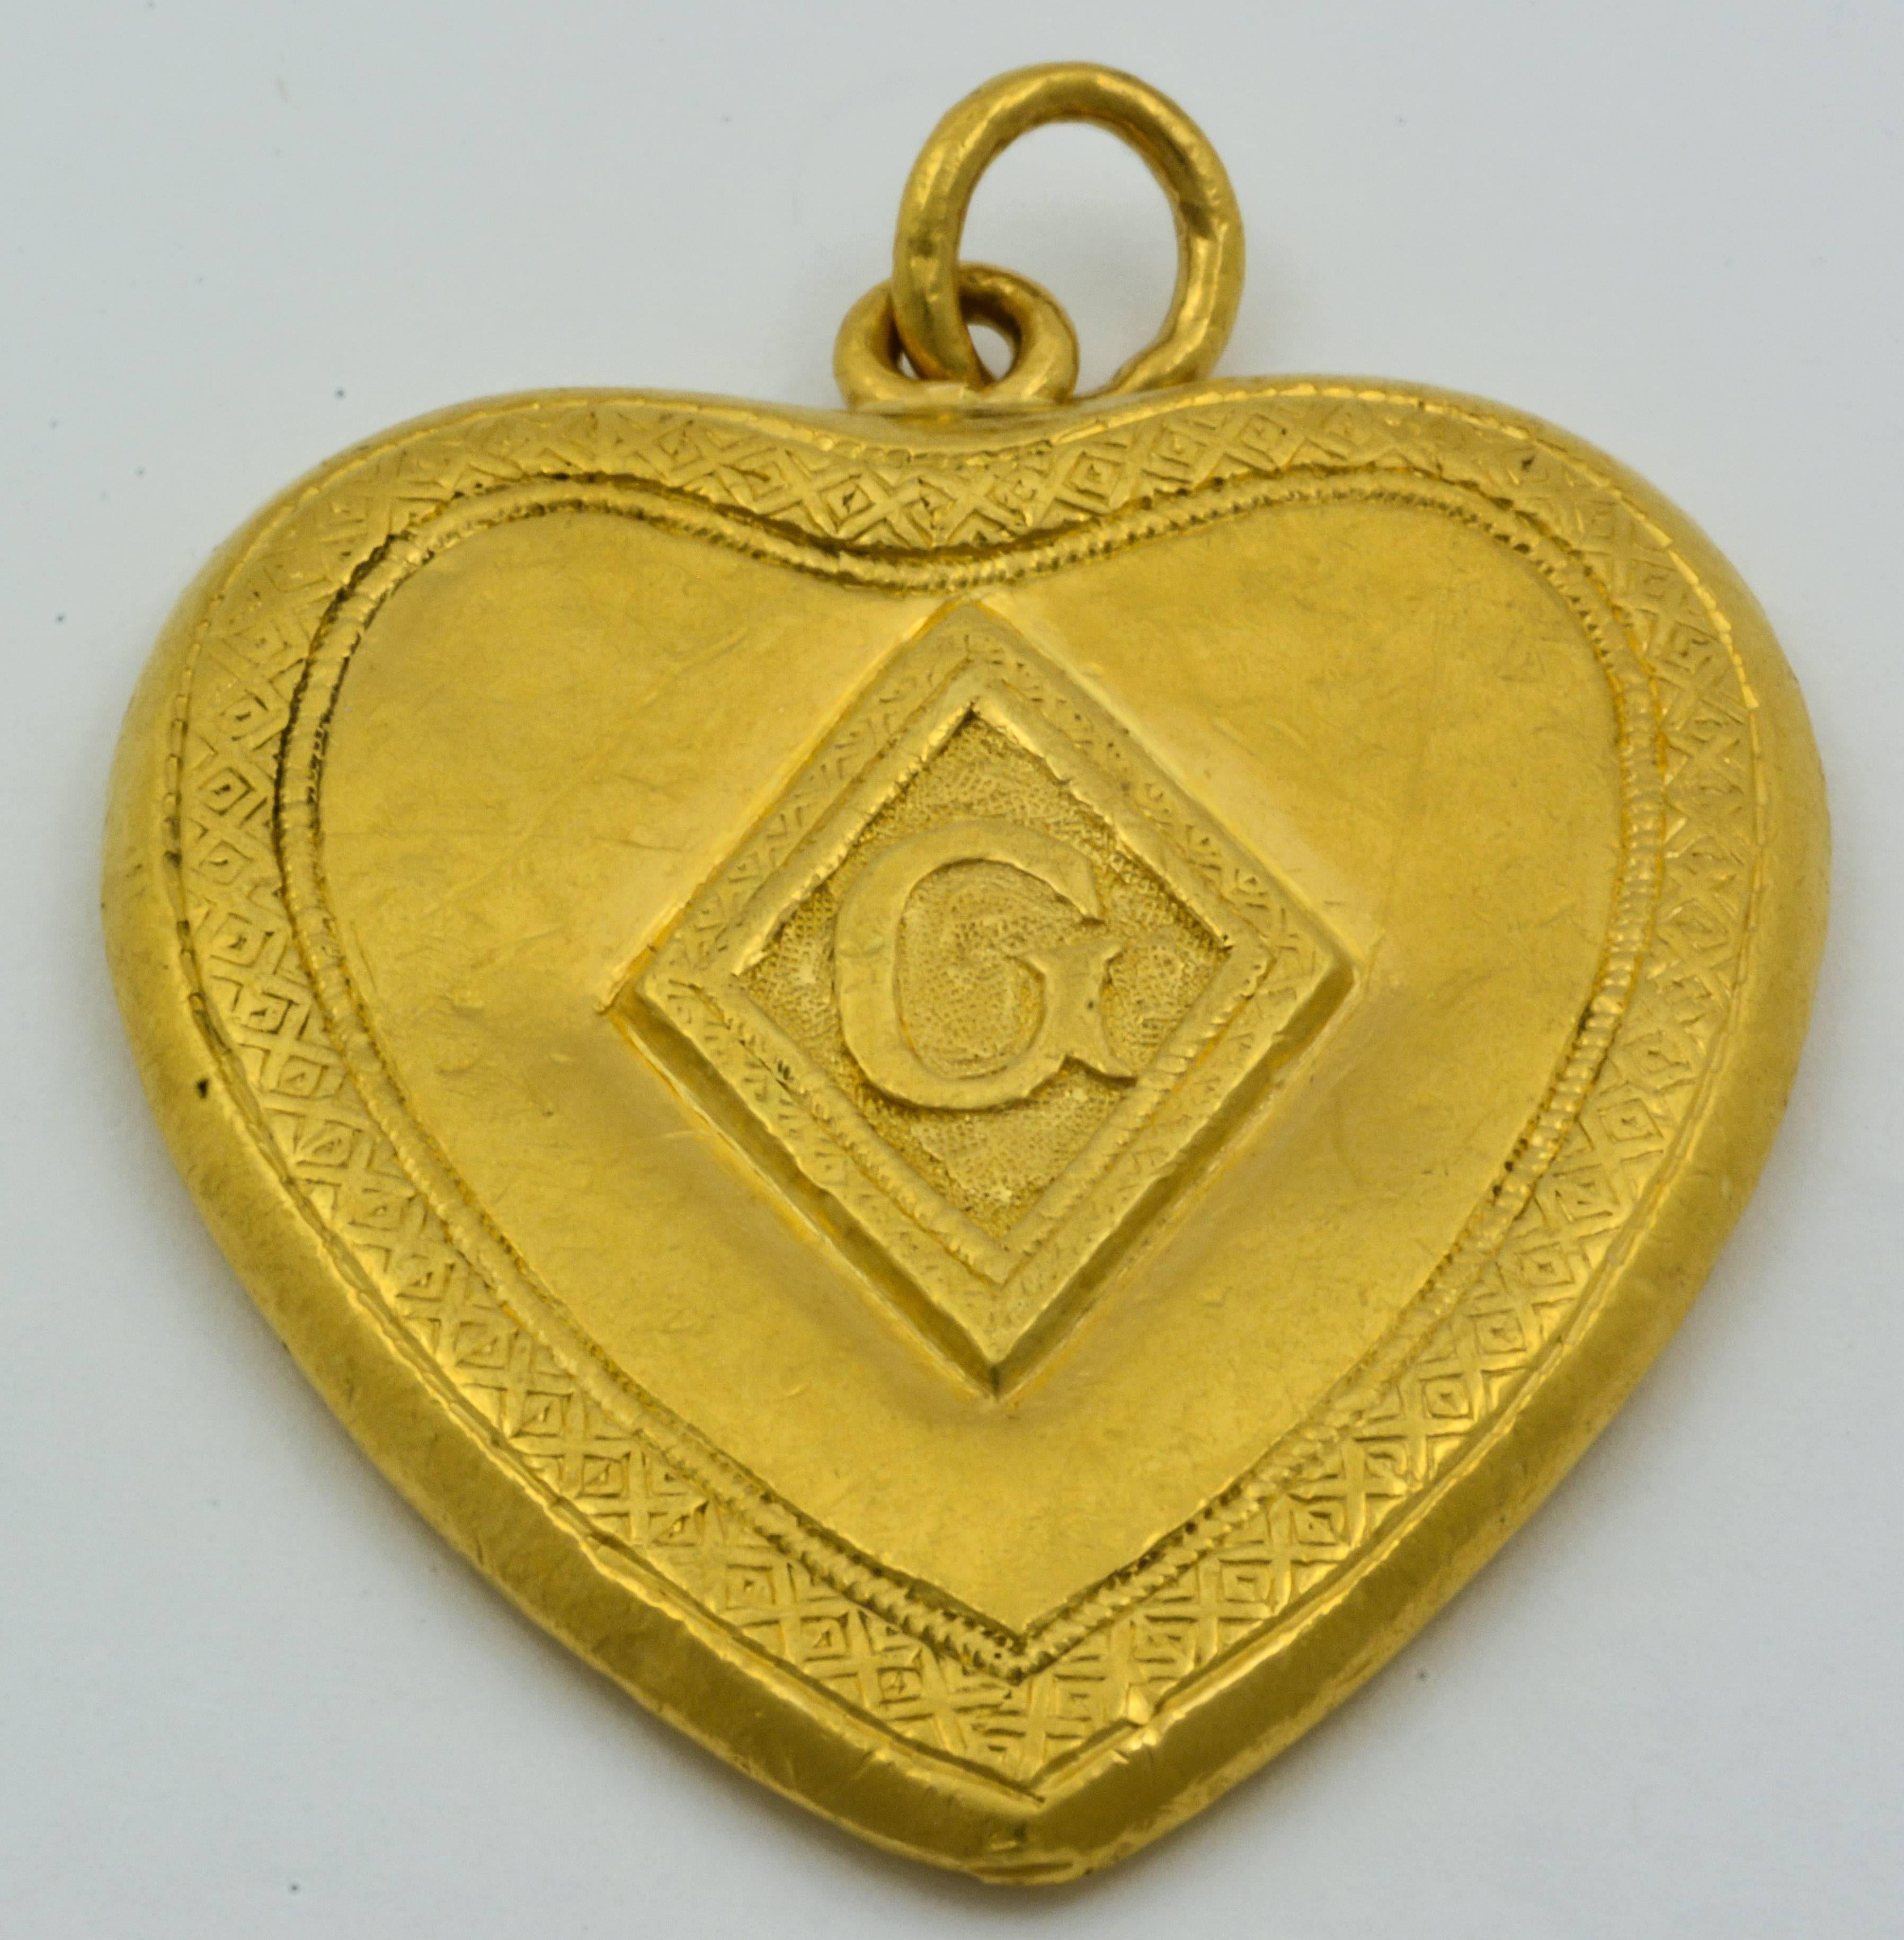 A beautiful flower and vine design is delicately carved into the antique gold of this heart-shaped pendant. An attractive monogram styled “G” is centered on the back of the heart. This Art Nouveau piece measures 37.33mm tall, 32.55mm wide, and 3.5mm